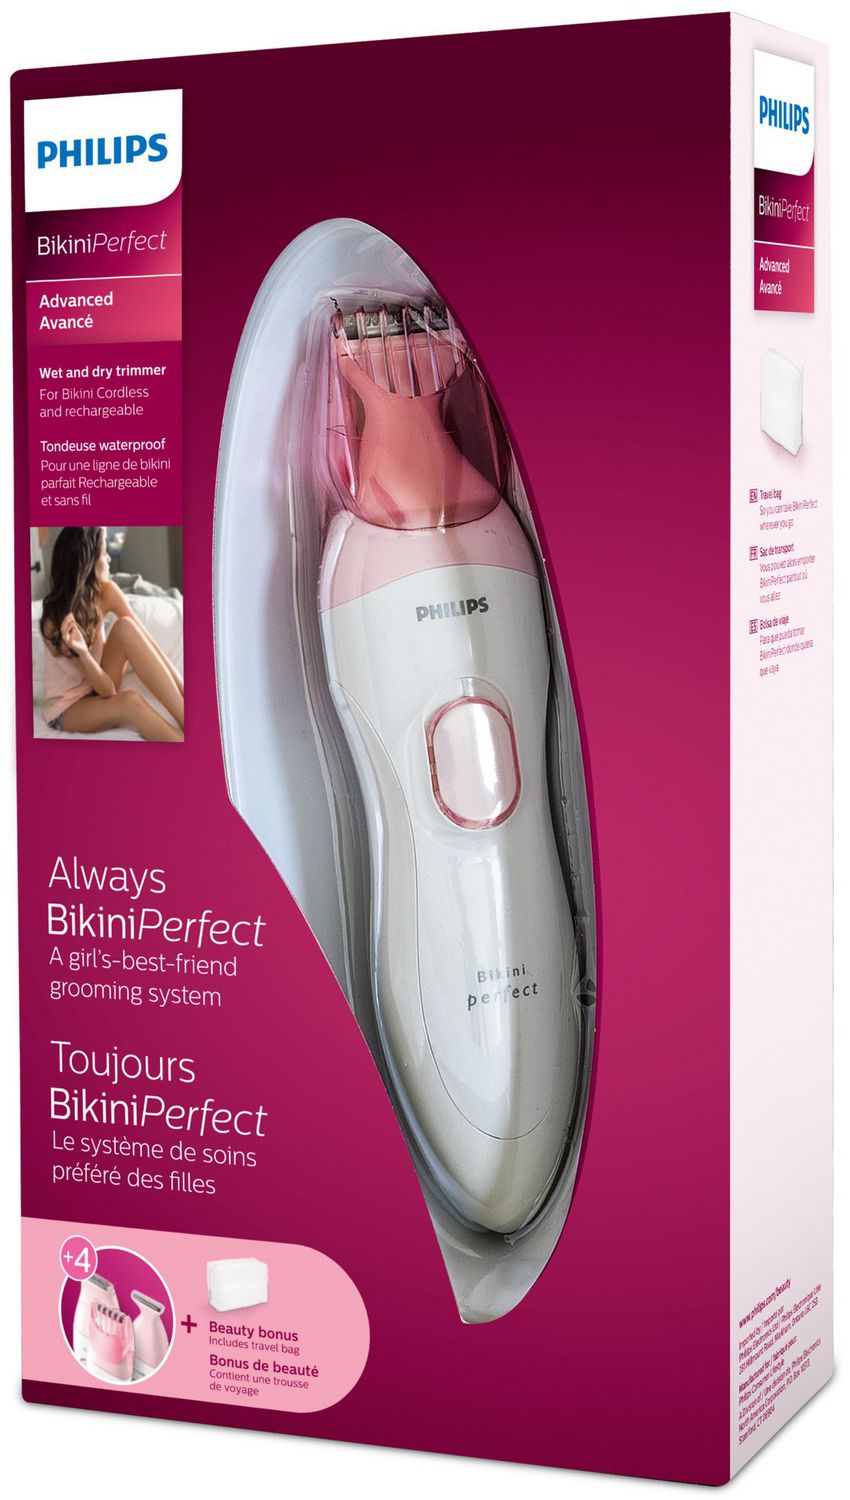 PHILIPS BikiniPerfect Advanced, Wet & Dry Trimmer for Bikini, cordless and rechargable use, 3 attachments HP6376/61